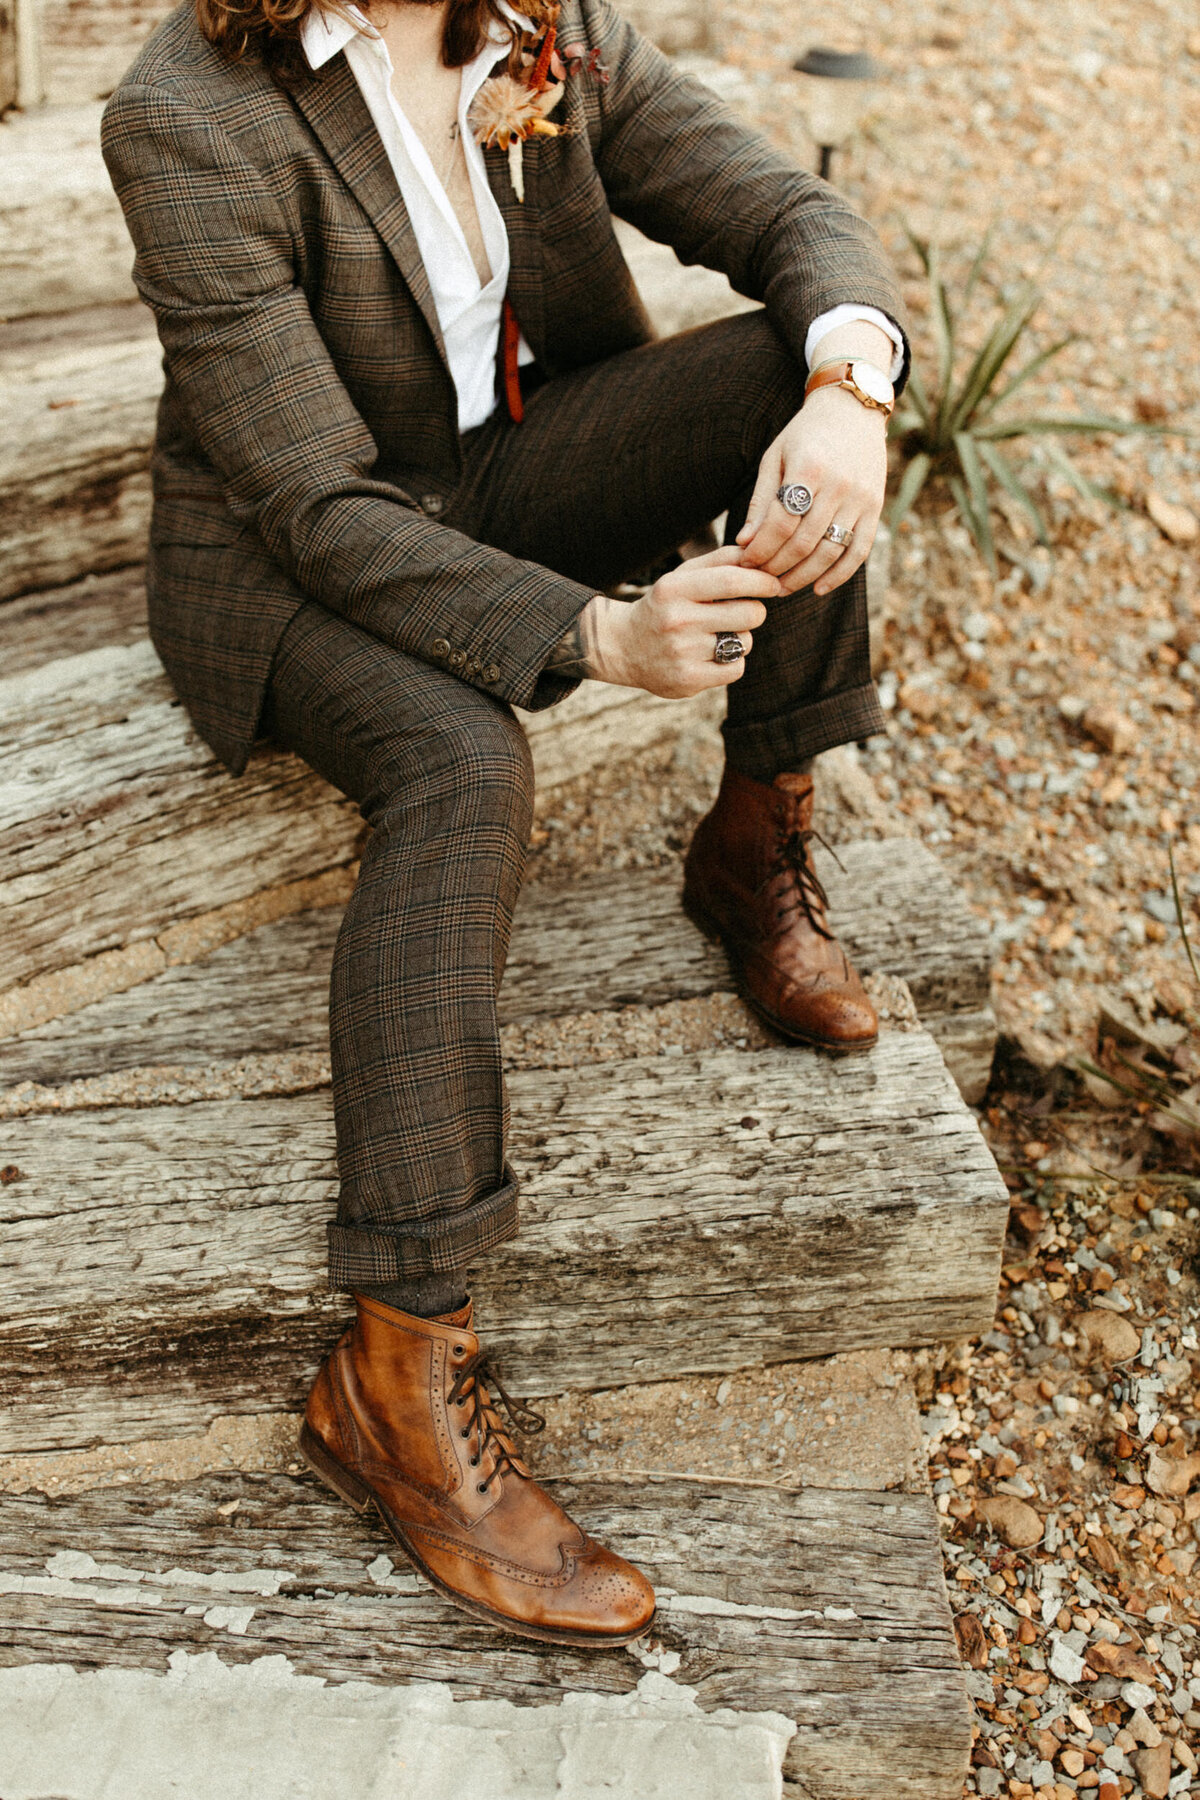 Groom in plaid suit and boots sitting on steps